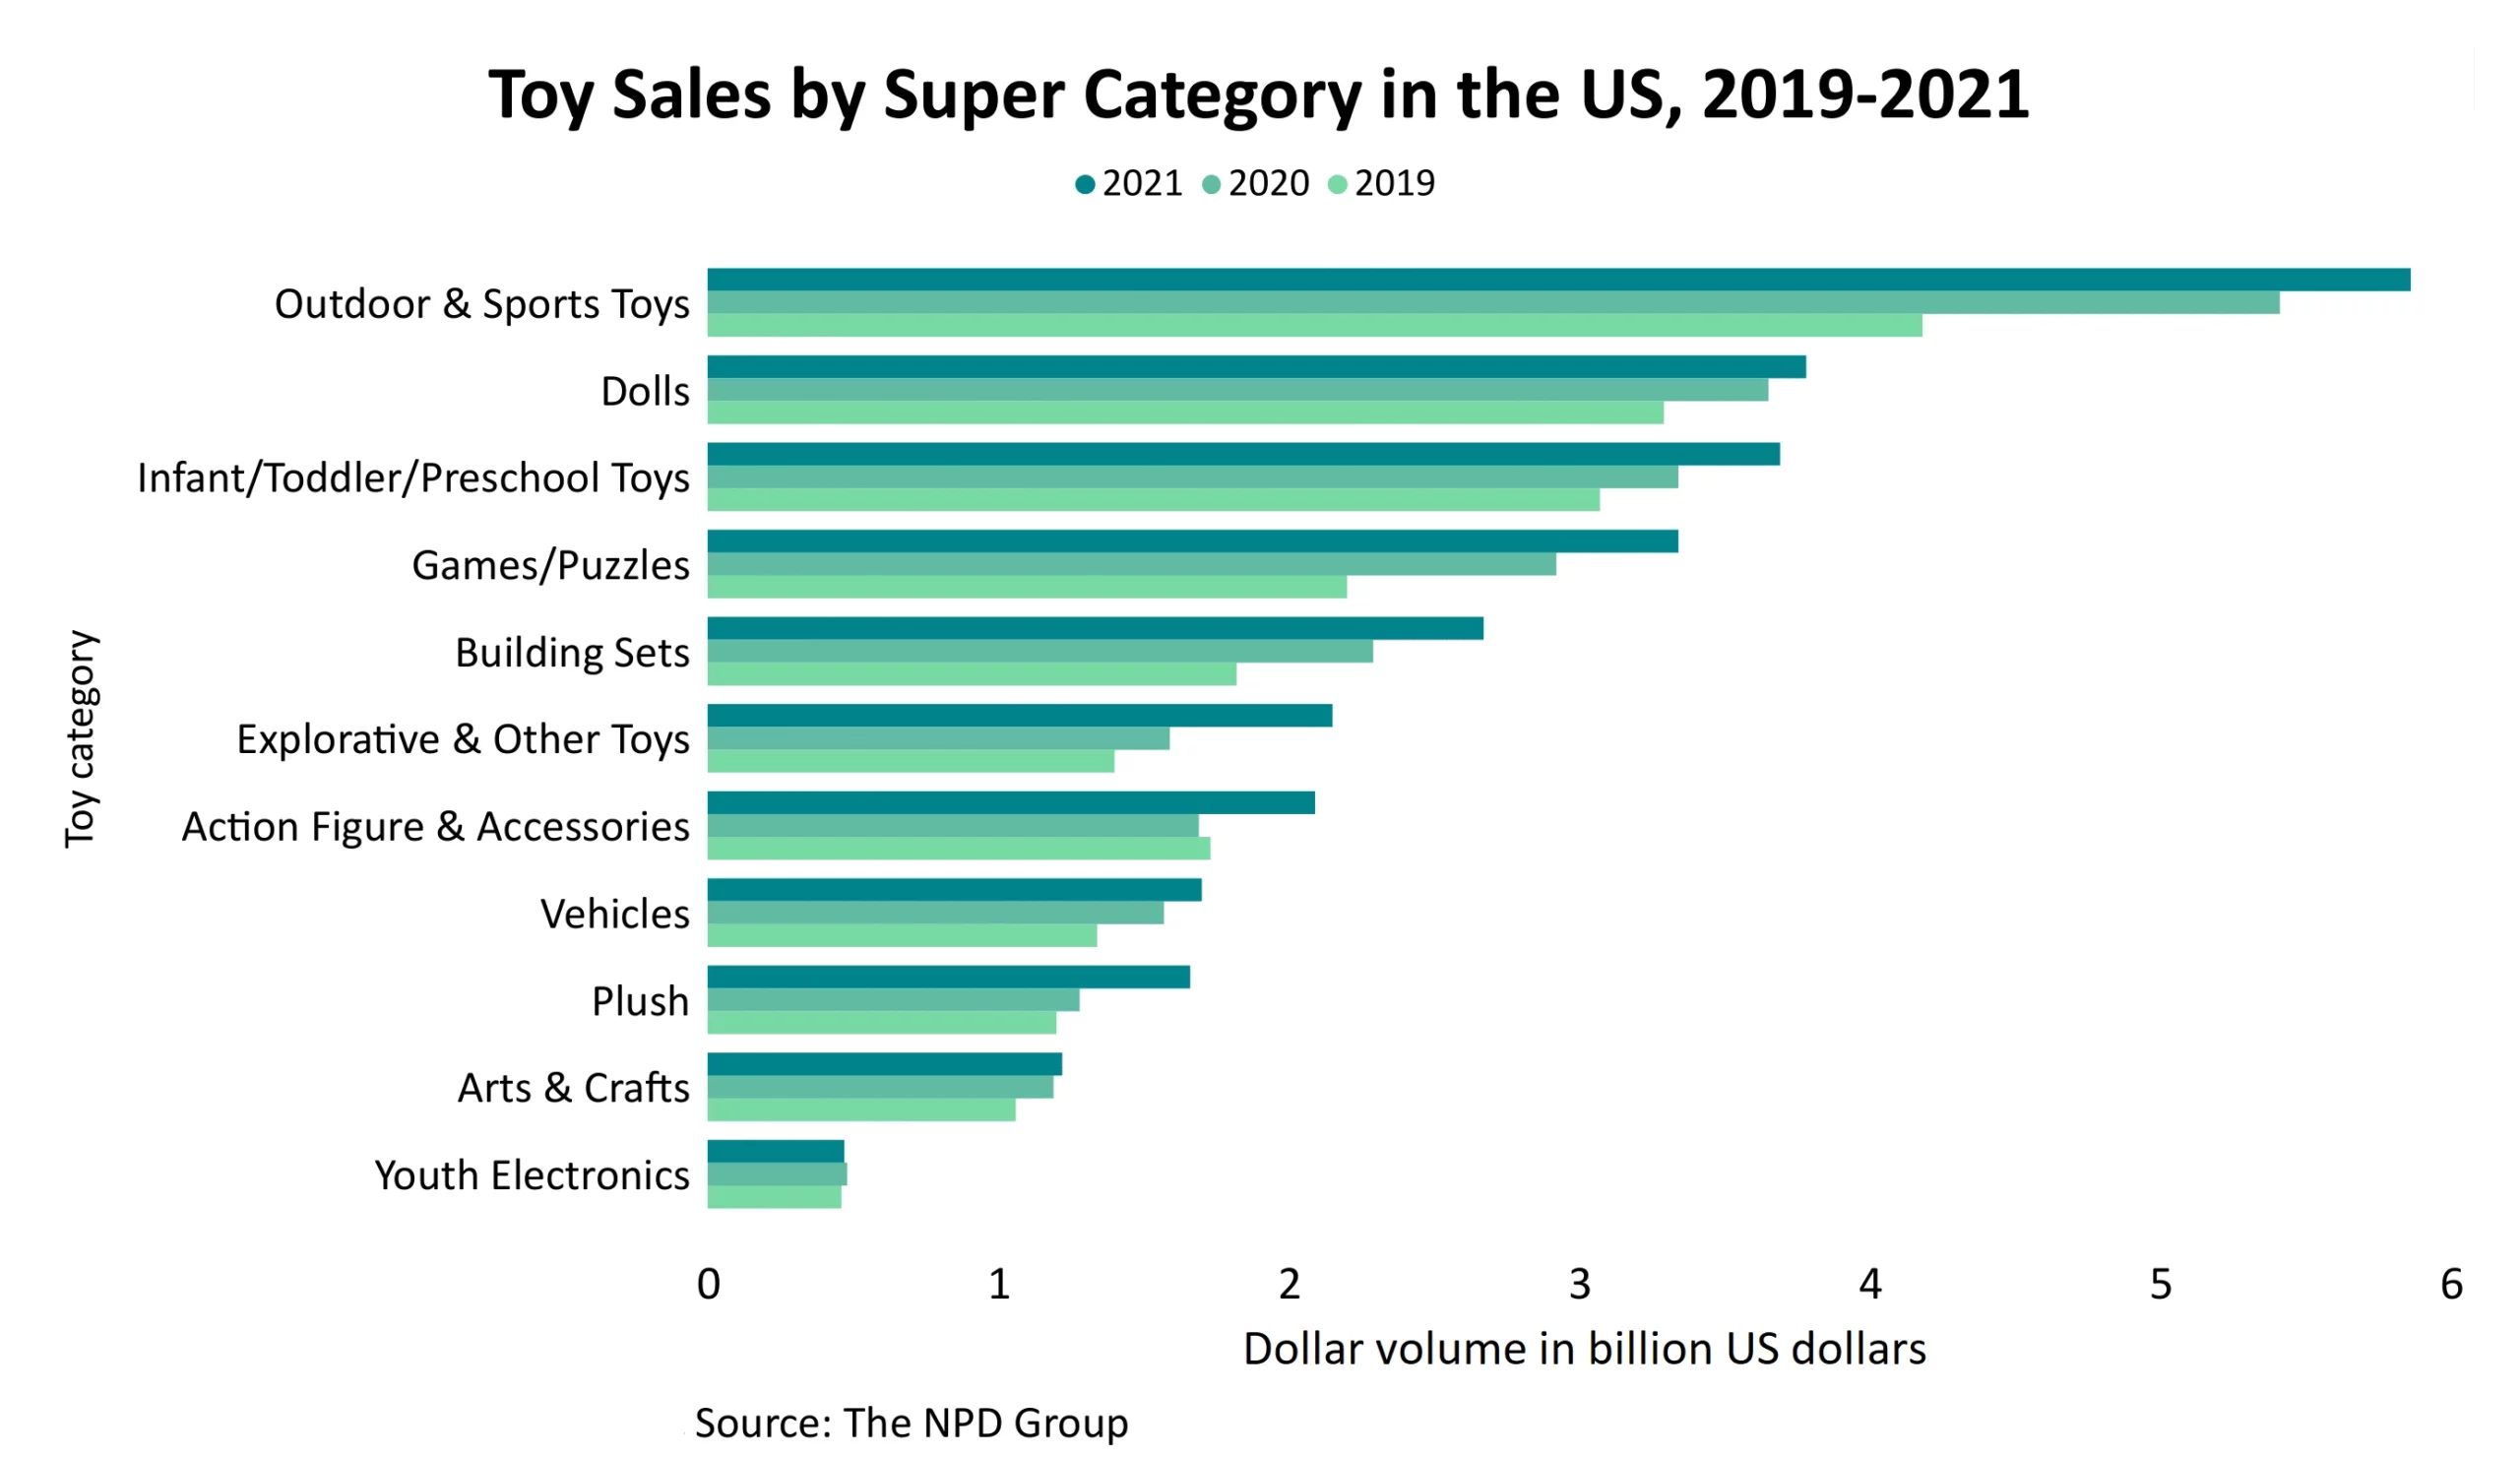 Toy Sales by Super Category in the US from 2019 to 2021